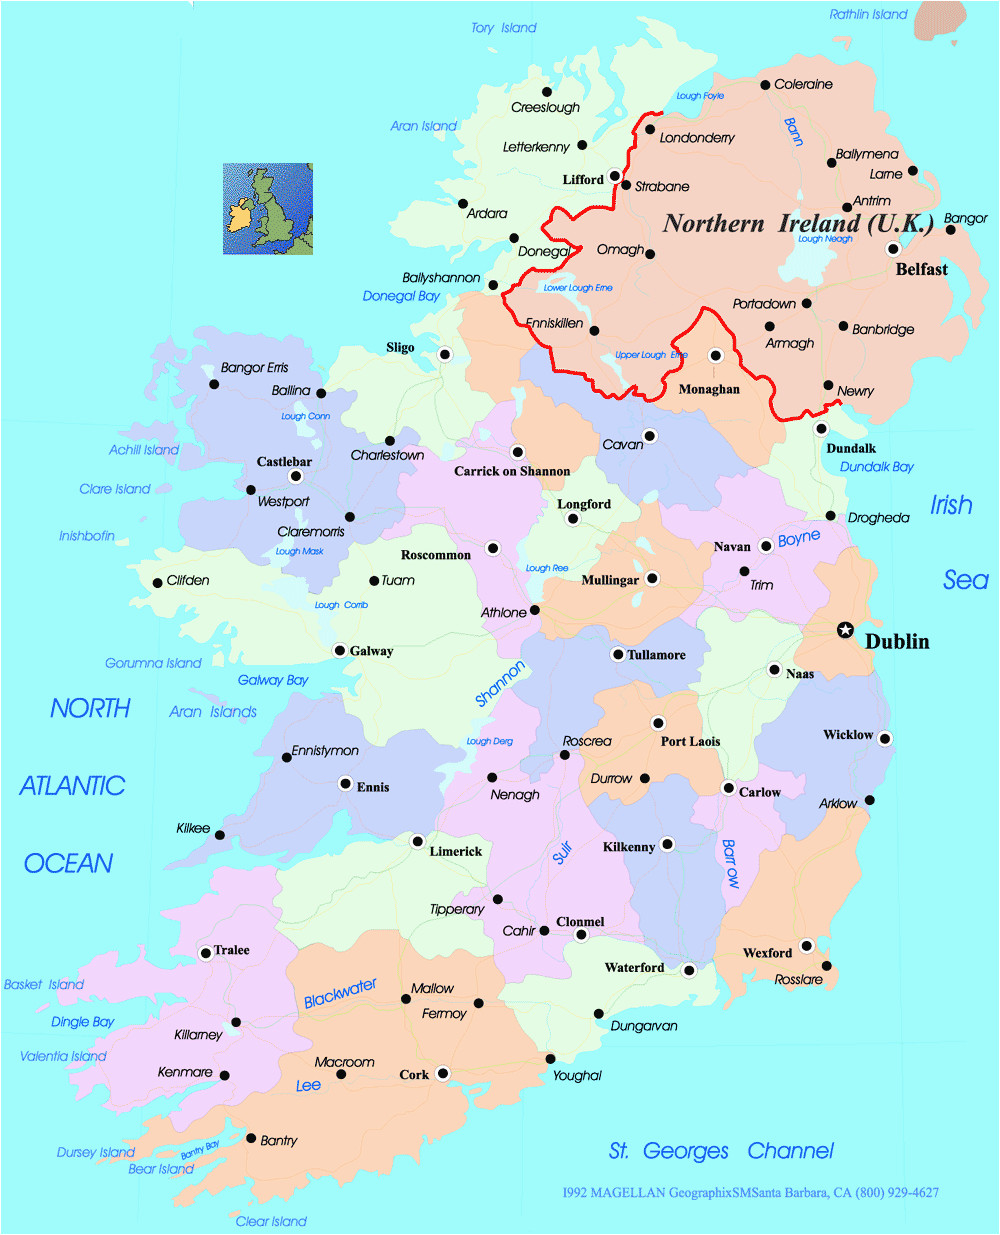 Map Of Ireland Counties And Provinces Ireland Map With Counties And Towns Google Search Ireland Of Map Of Ireland Counties And Provinces 